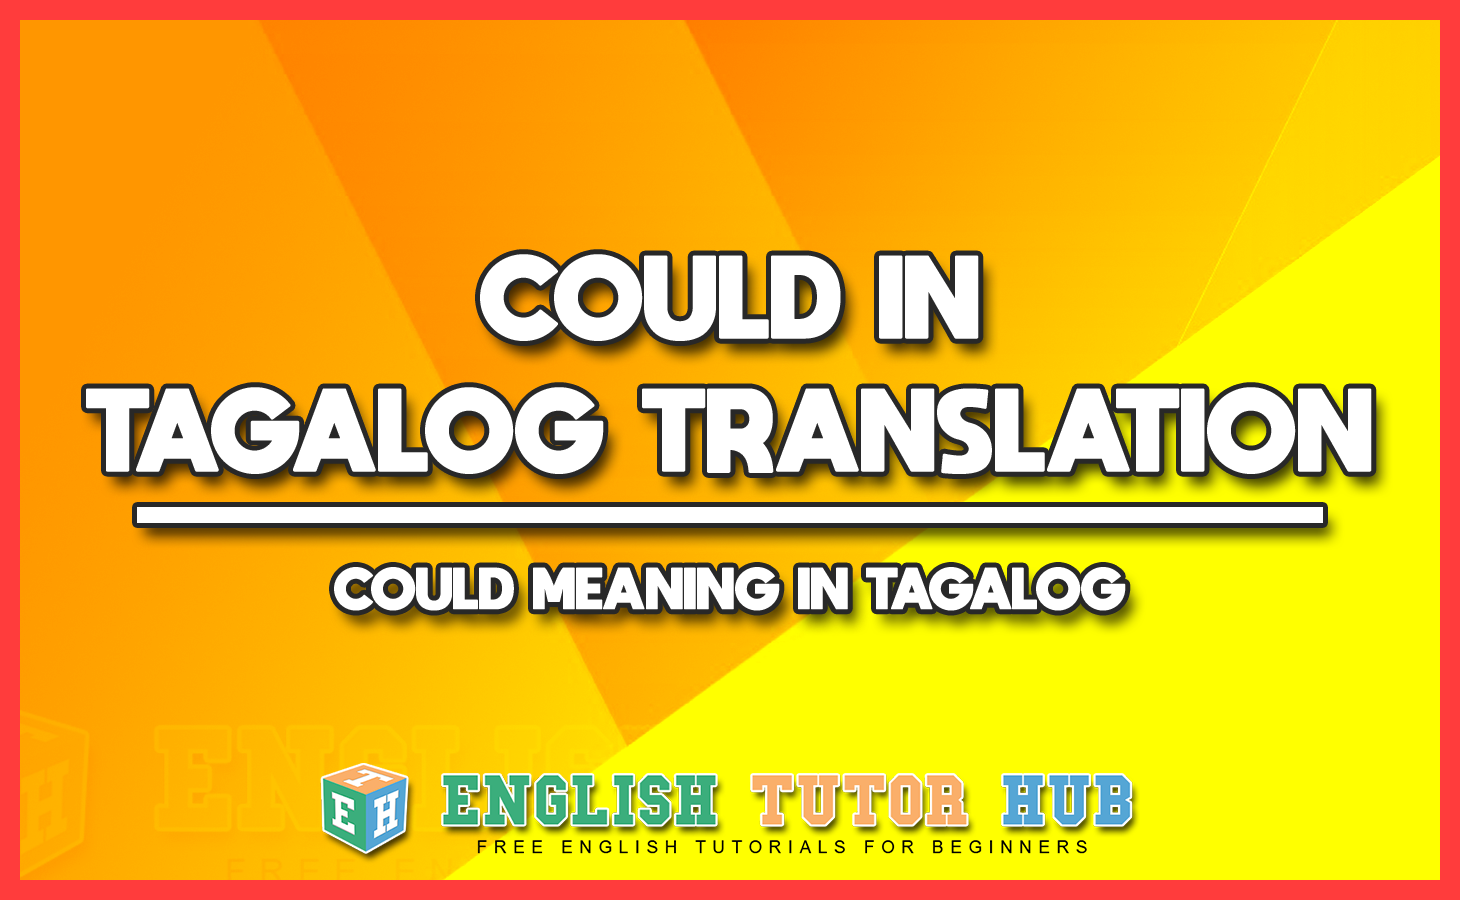 COULD IN TAGALOG TRANSLATION - COULD MEANING IN TAGALOG